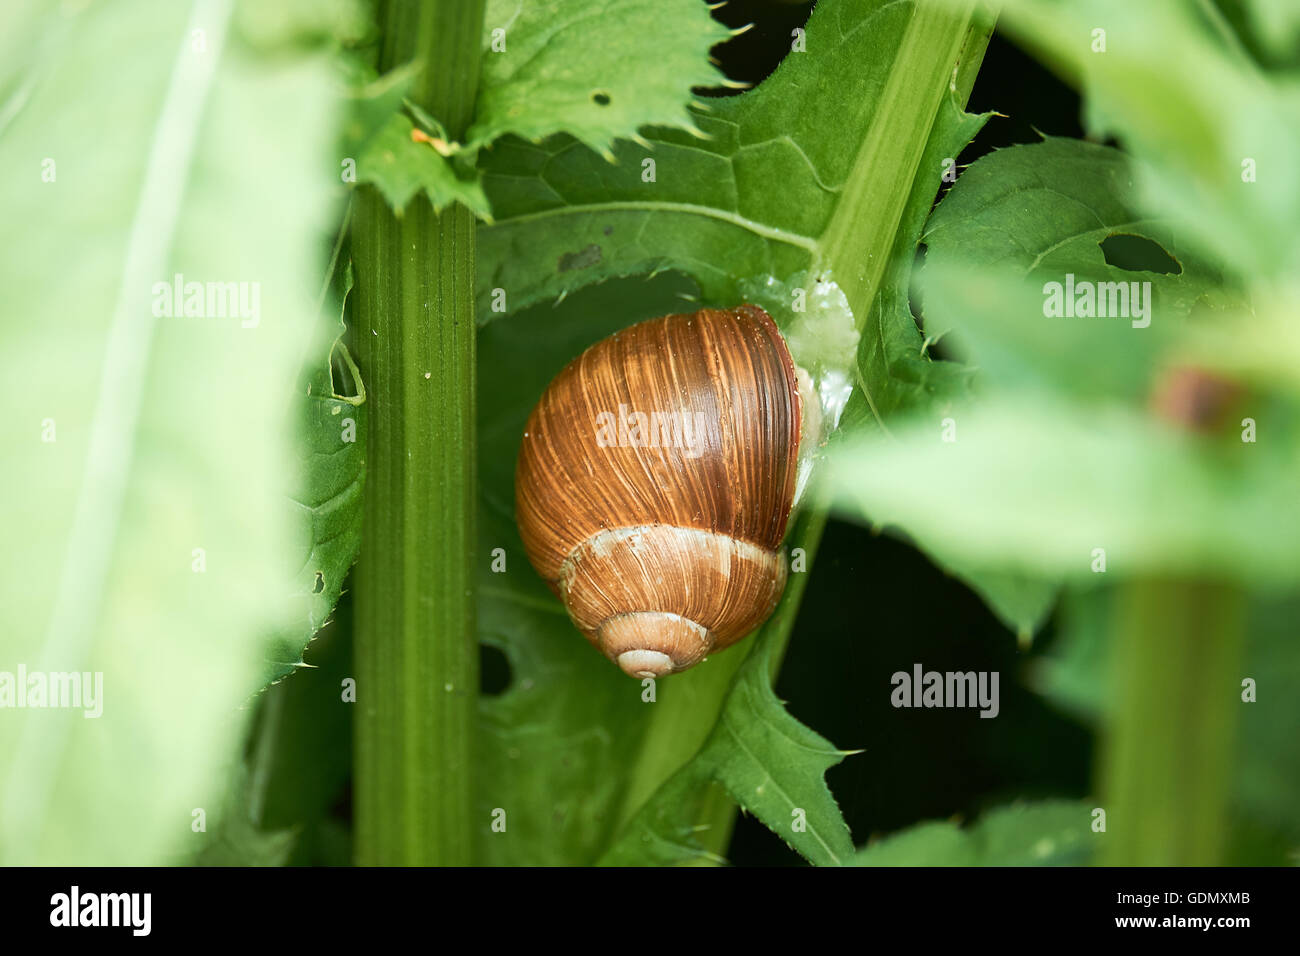 Big snail with a brown shell, sitting on a stem of a green plant in a wilderness Stock Photo